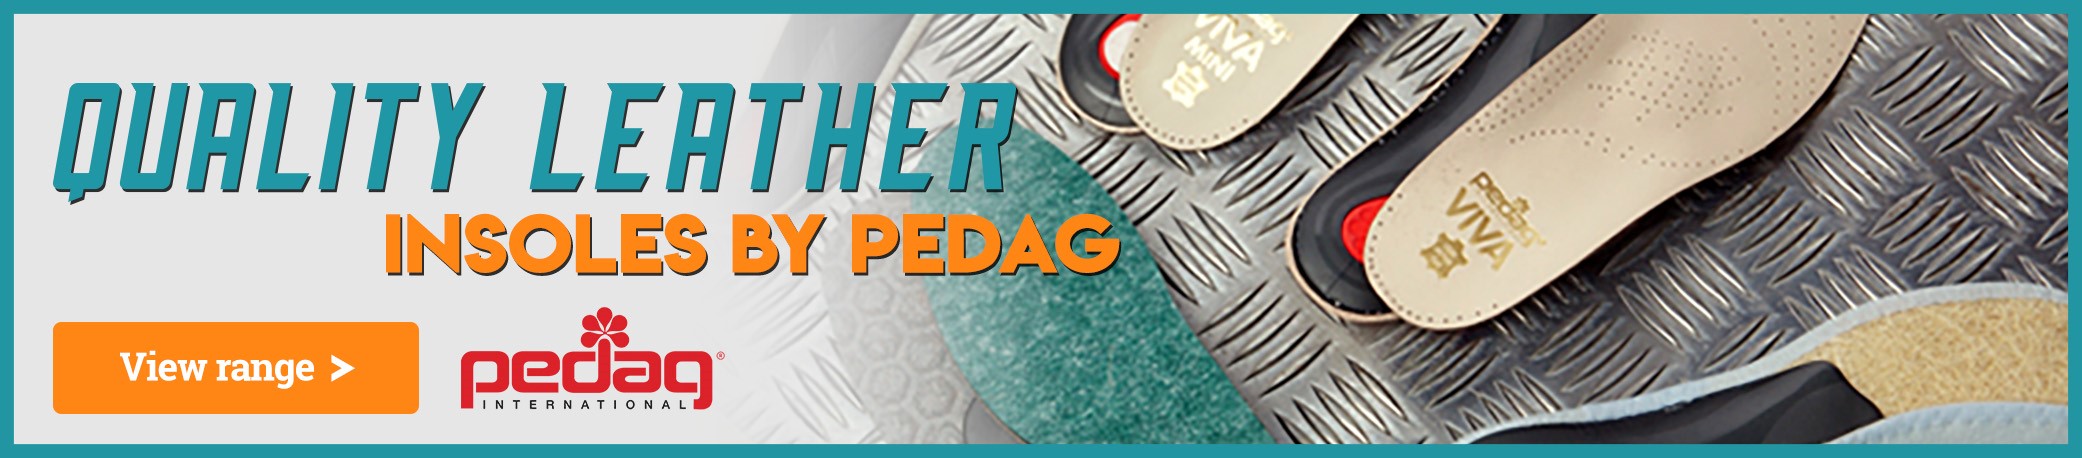 Visit our Pedag Category to See Our Full Range of Pedag Insoles